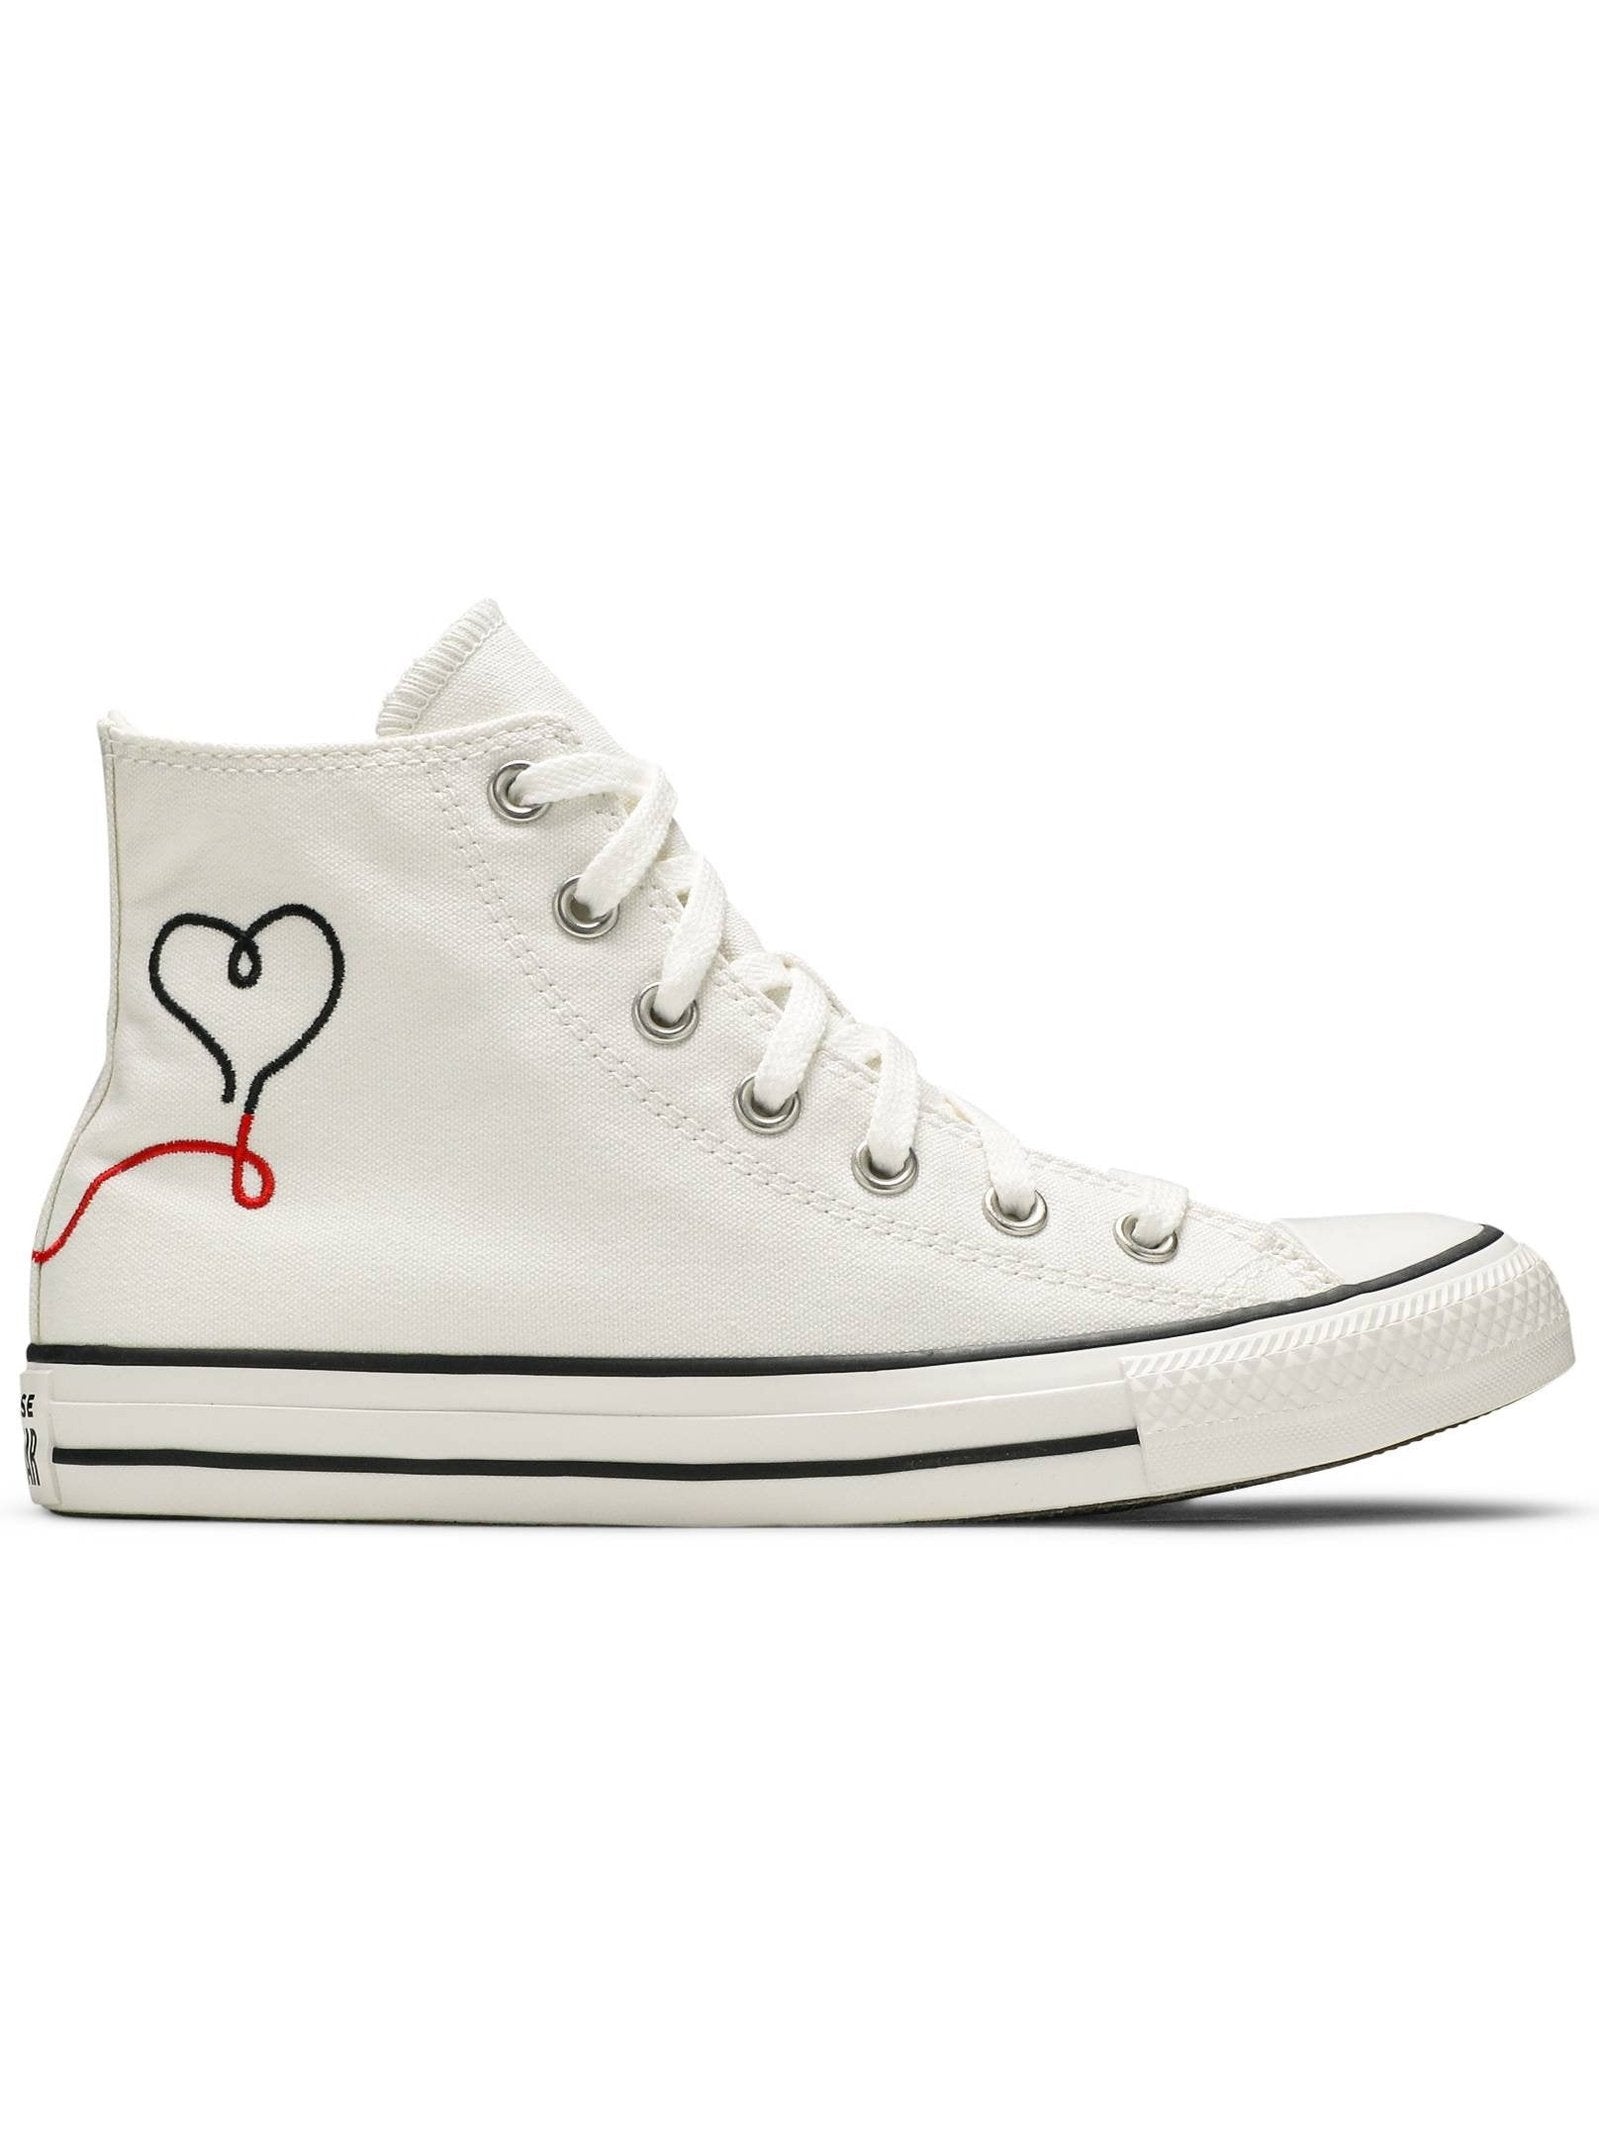 Converse Chuck Taylor All Star High Made With Love Vintage White/Egret/Black 171159F.